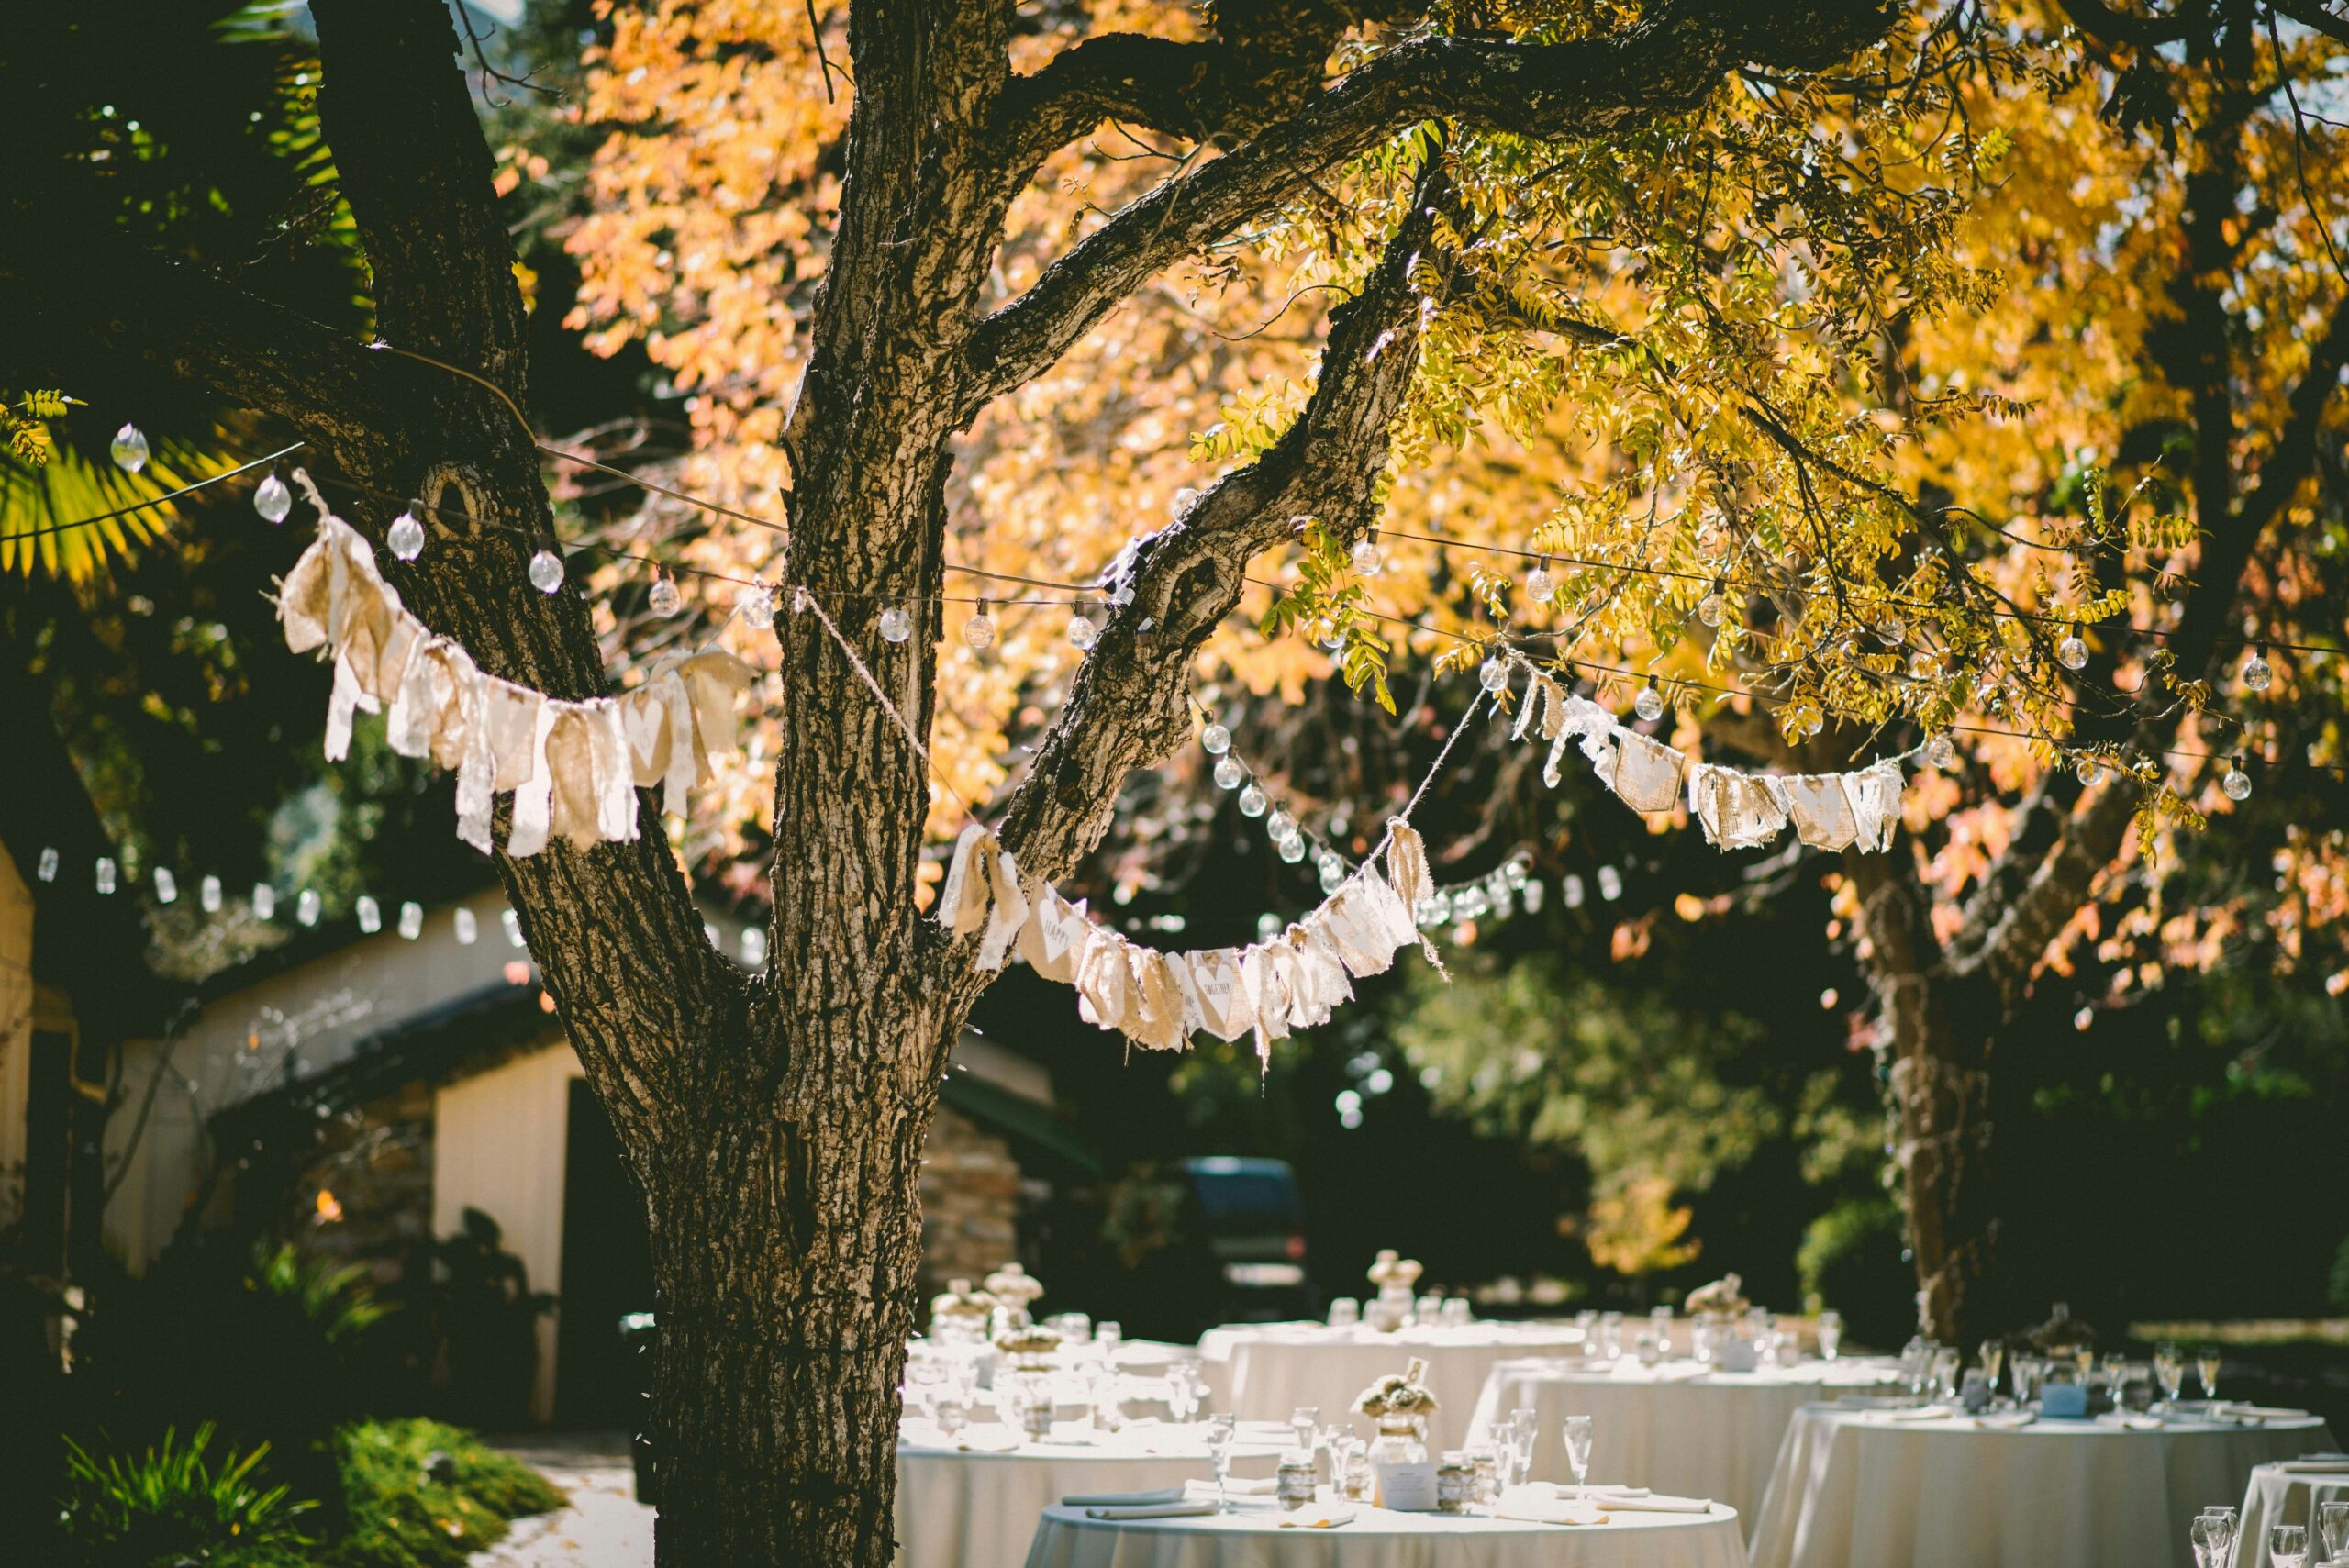 A tree with colorful bunting is over tables set with white cloths and tableware for a wedding.